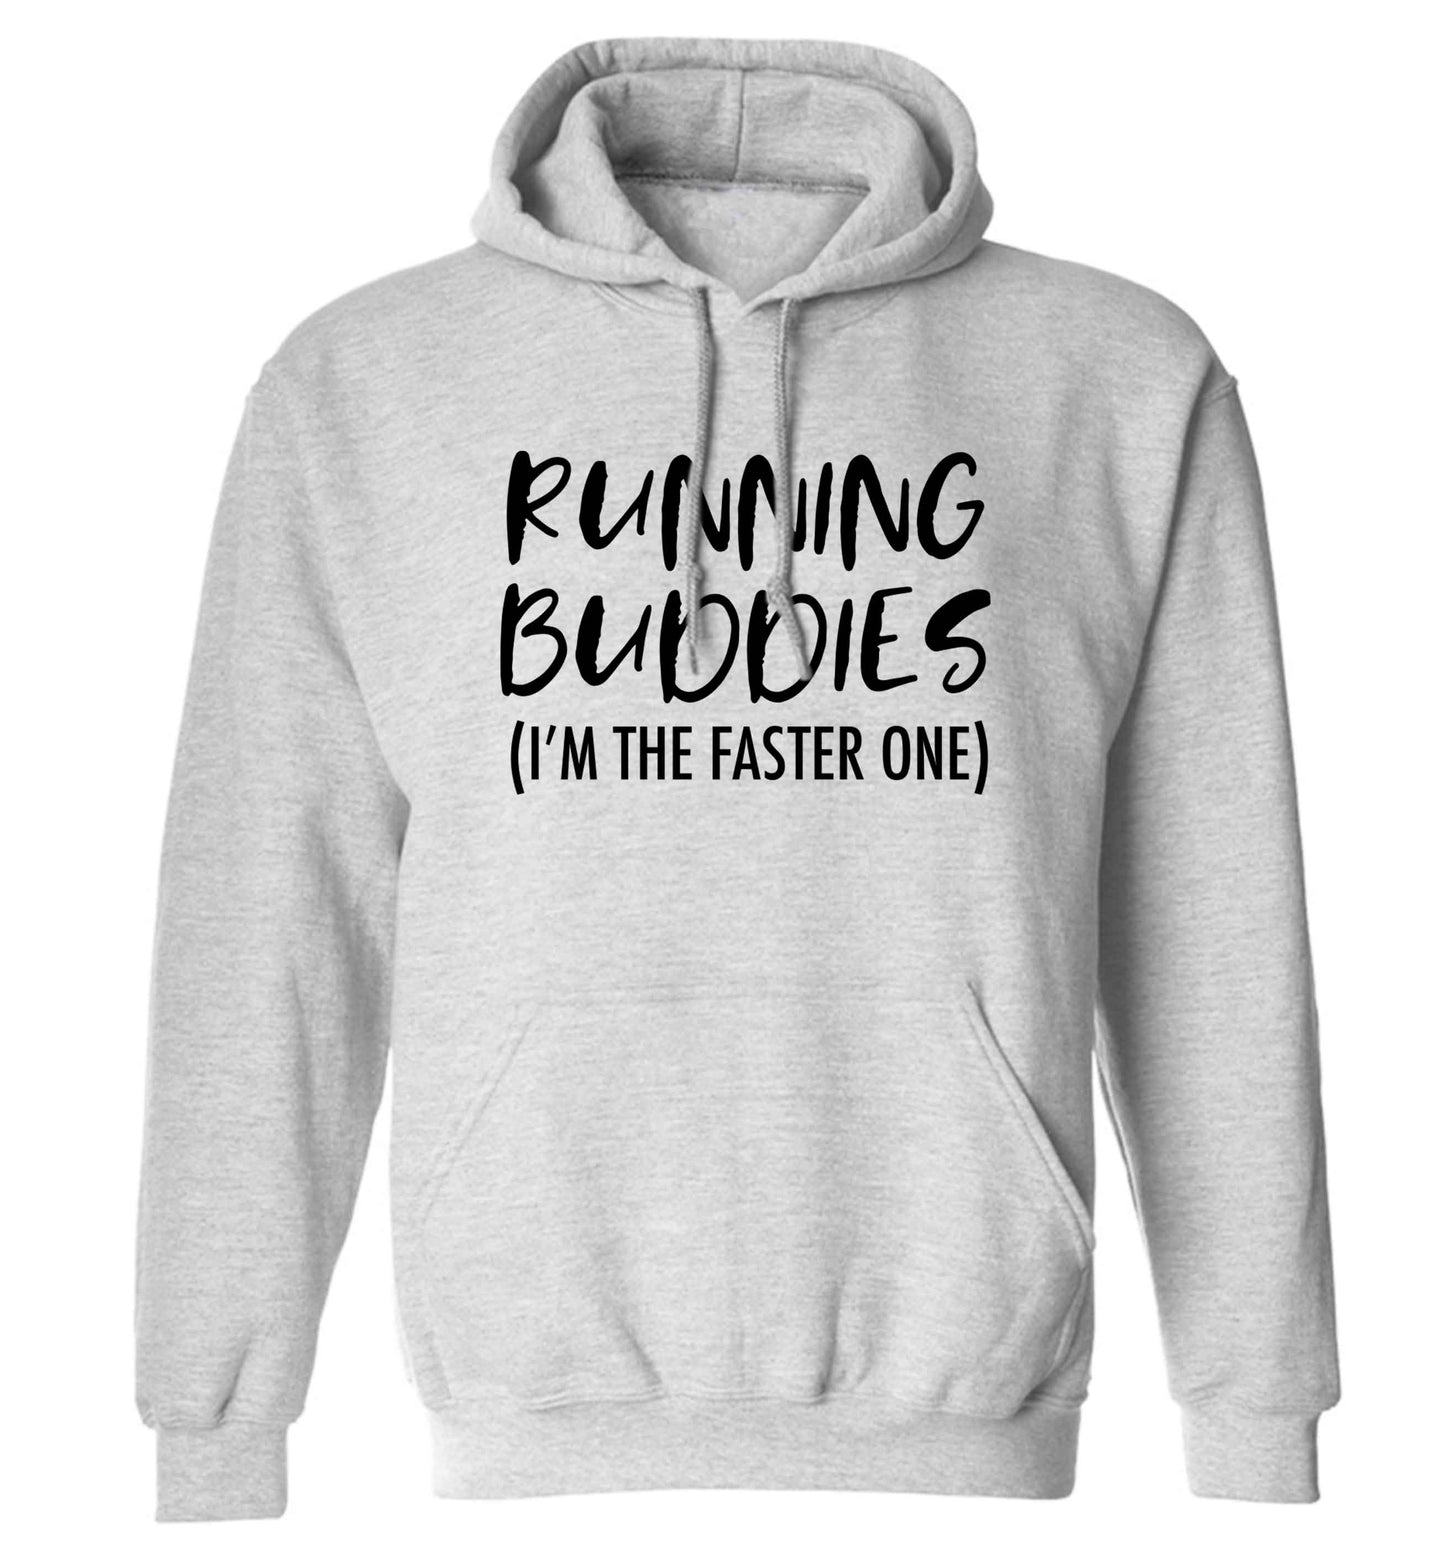 Running buddies (I'm the faster one) adults unisex grey hoodie 2XL